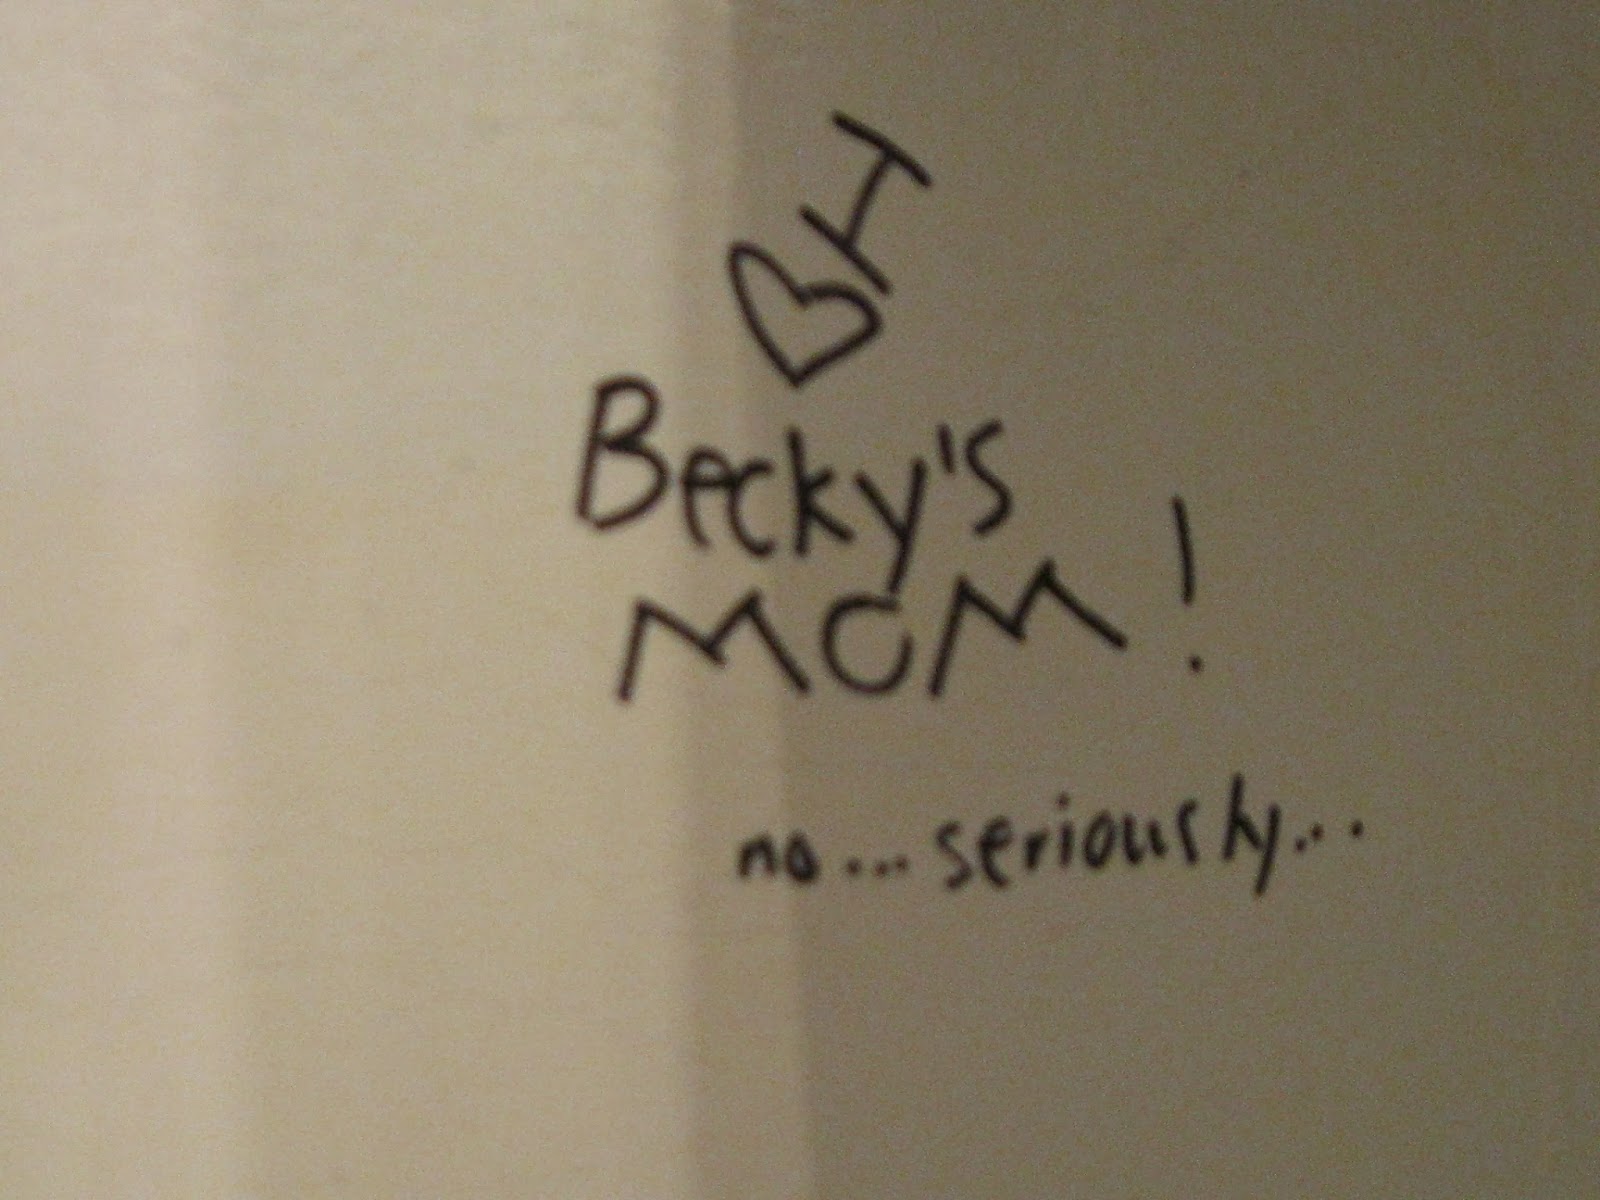 During a break from the game I noticed my mom has her own fan club that municates its love for her on our bathroom wall